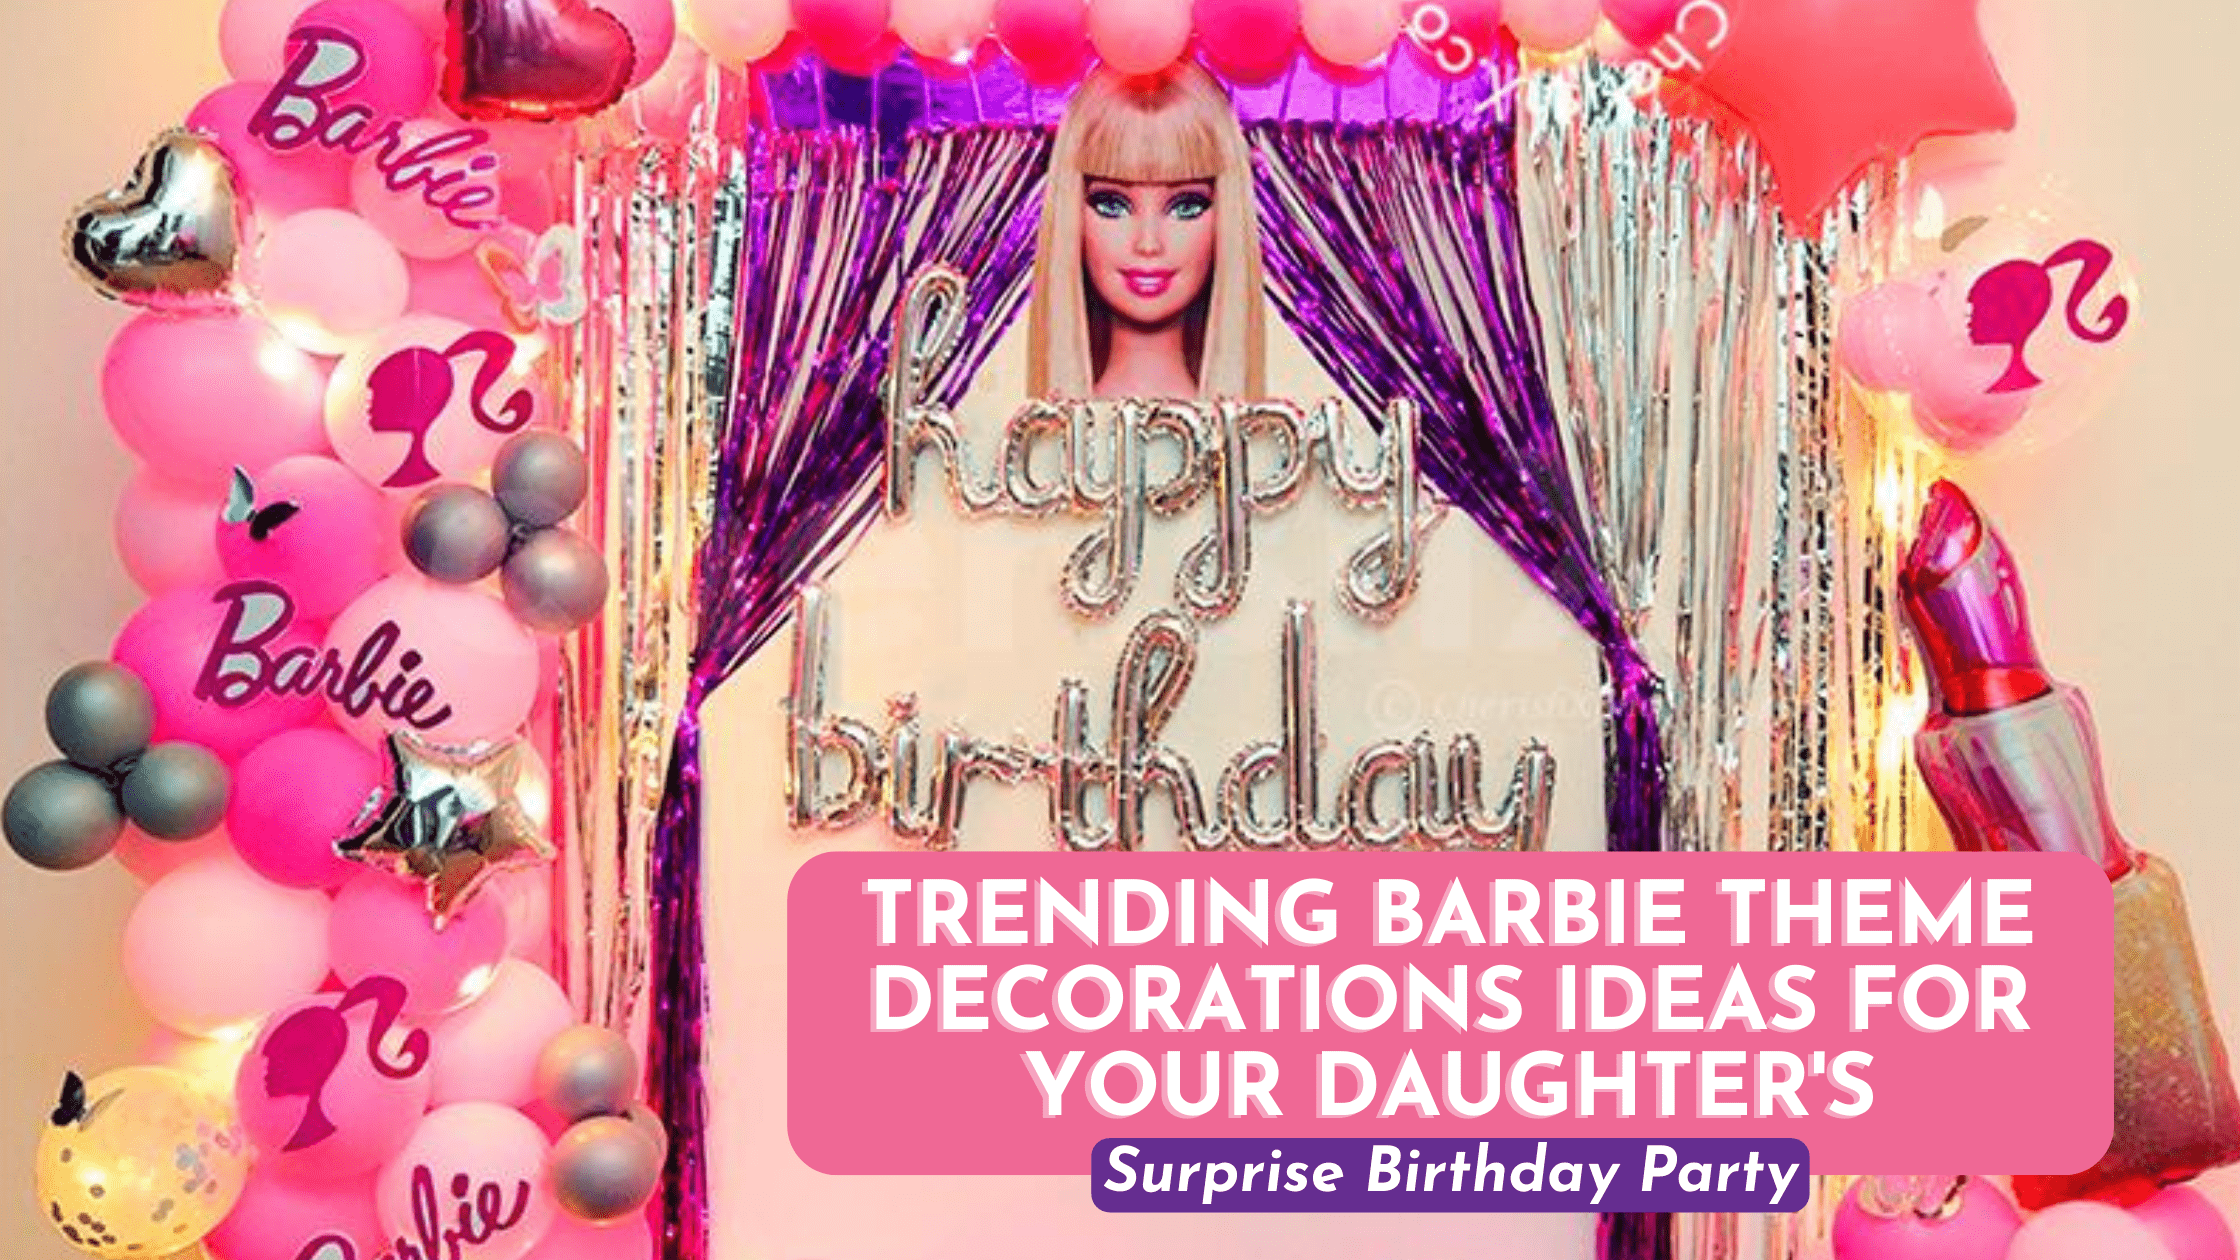 Trending Barbie Theme Party Ideas for your Daughter’s Surprise Birthday Party: She will love the Sequin one